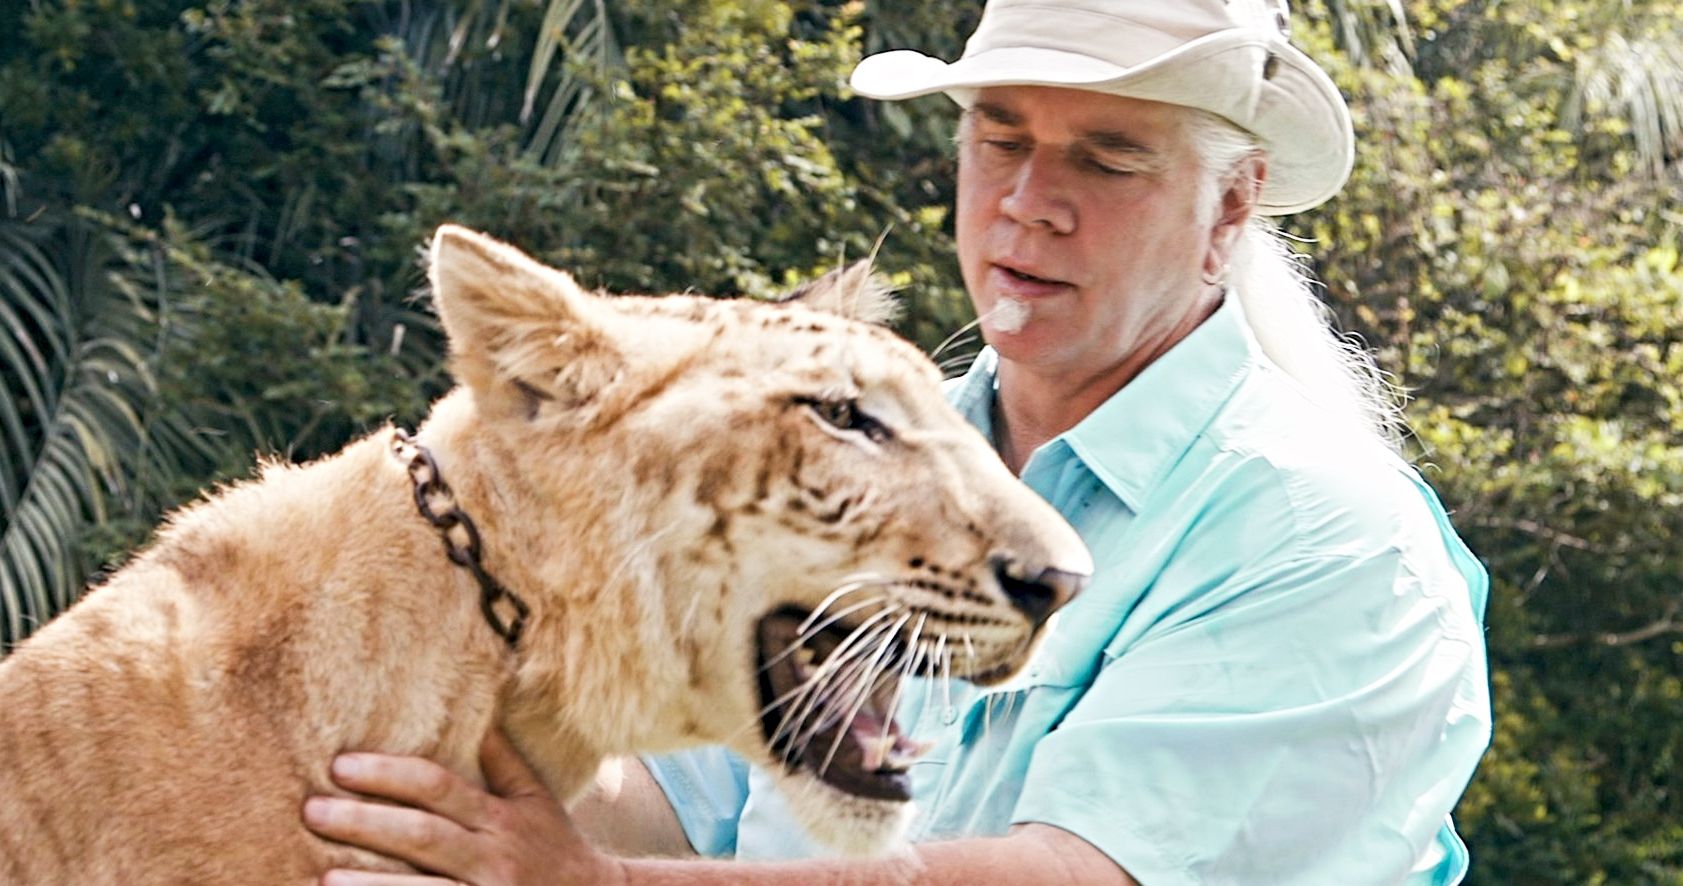 Tiger King Star Doc Antle Indicted on Animal Cruelty and Wildlife Trafficking Charges